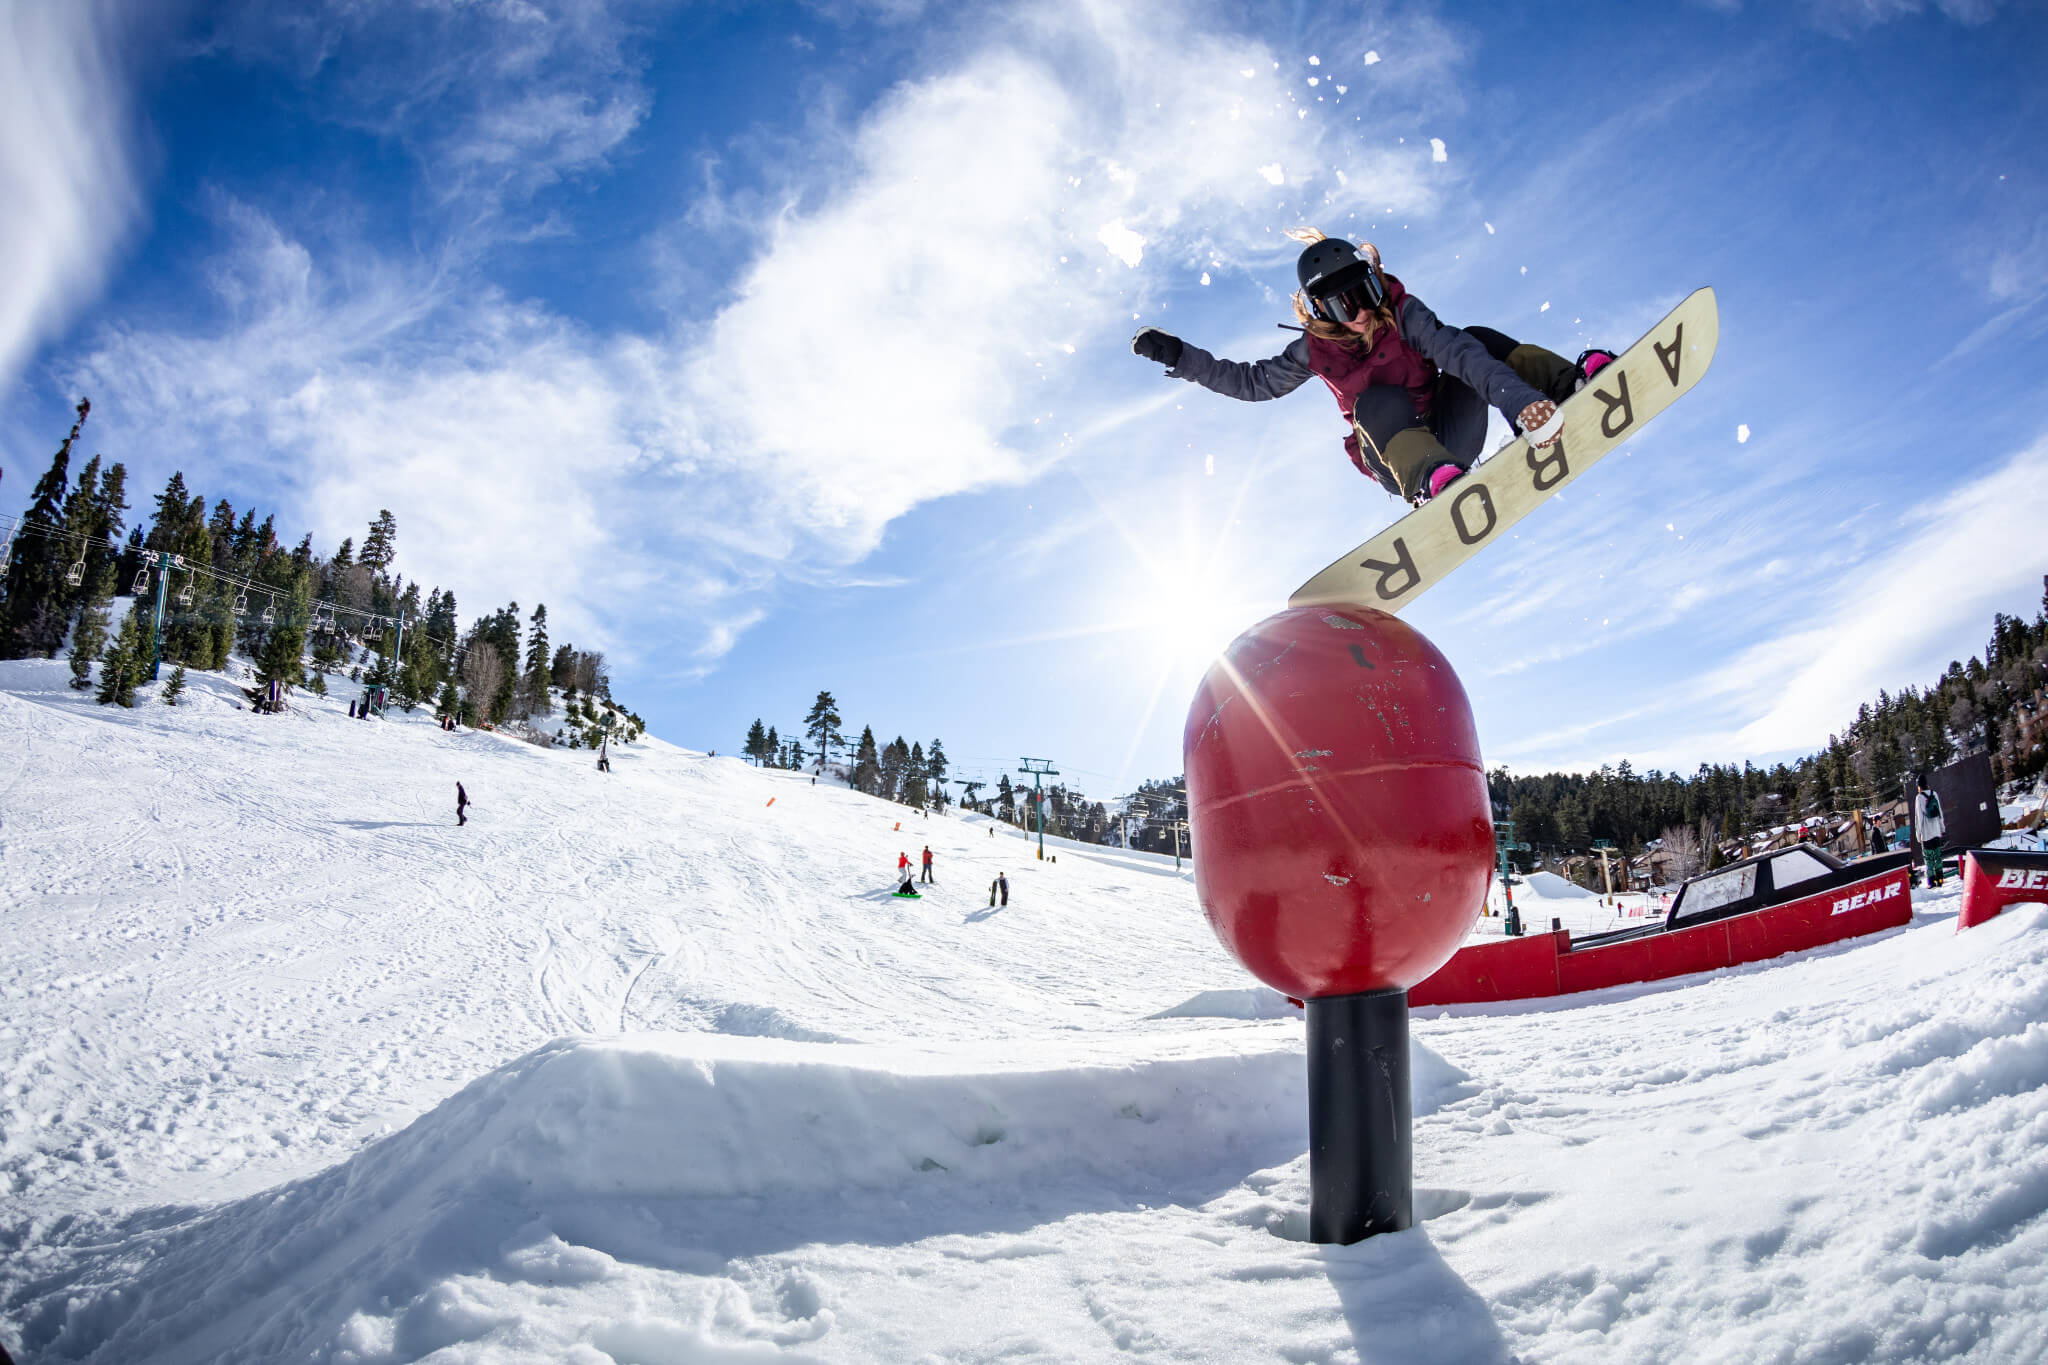 Snowboarder doing a trick at the terrain park at Big Bear Mountain Resort in California